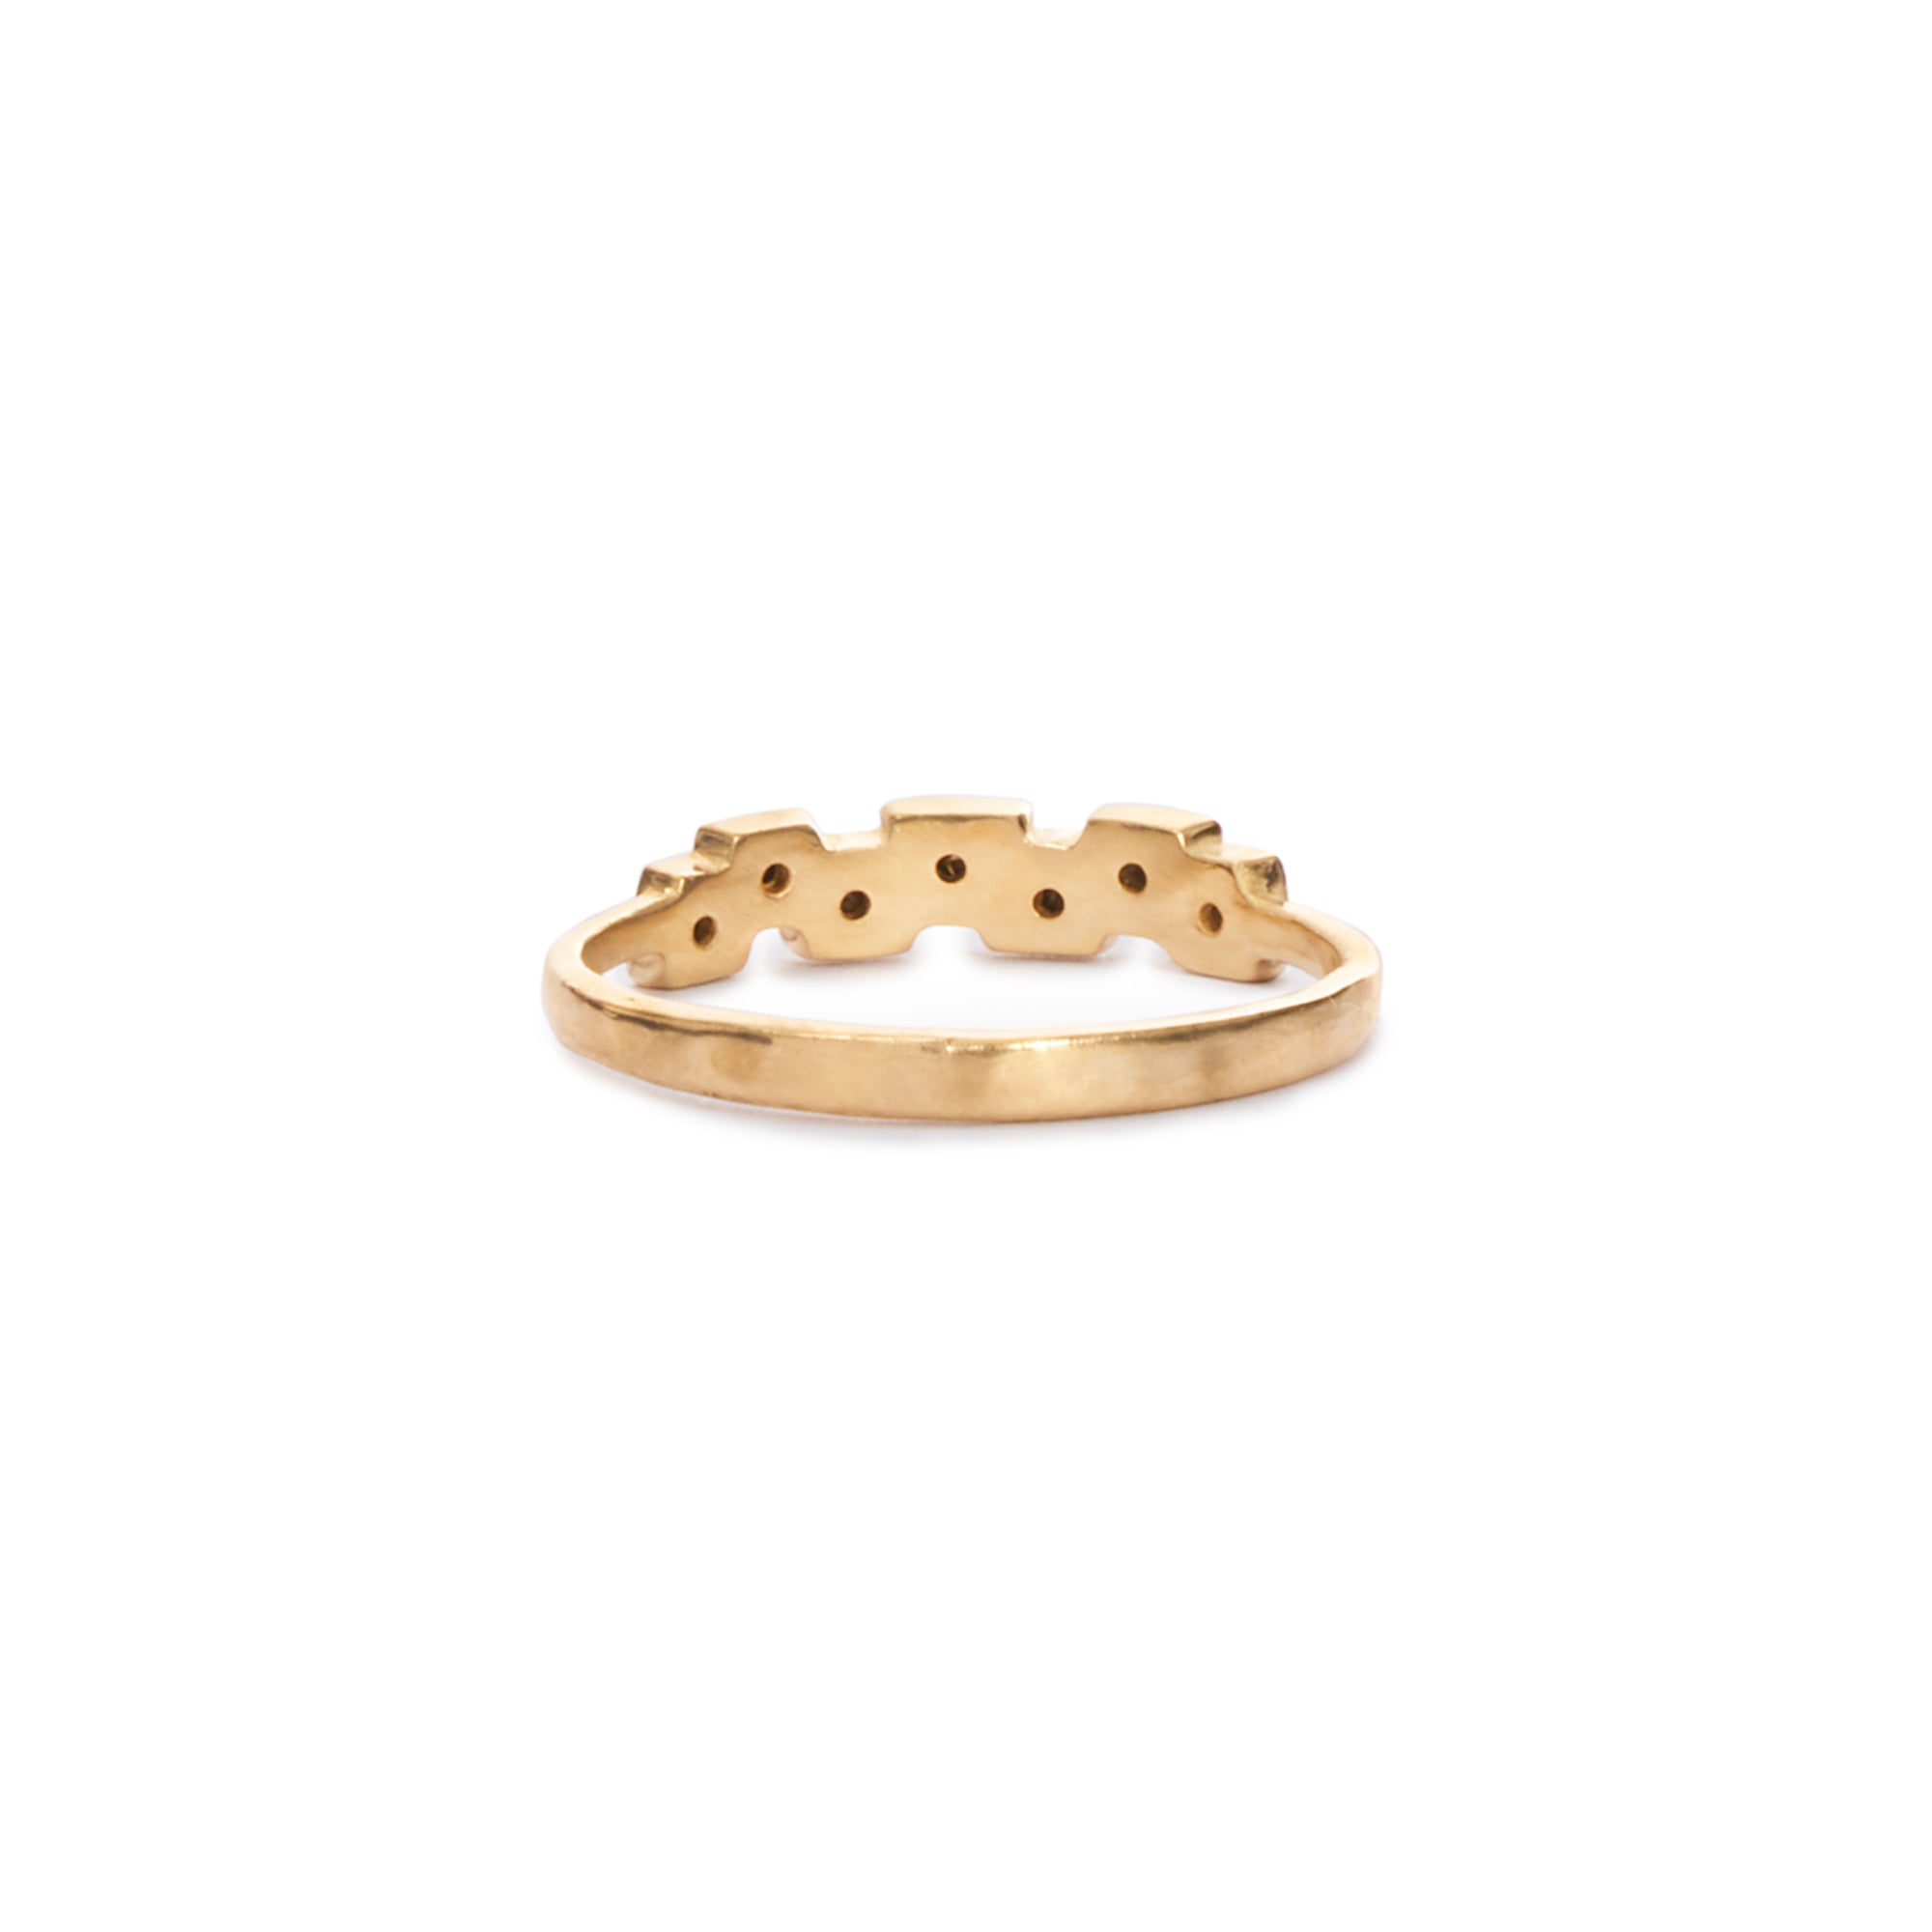 The Coral ring features 7 champagne diamonds flush set in textured 14k gold, with a hammered band.